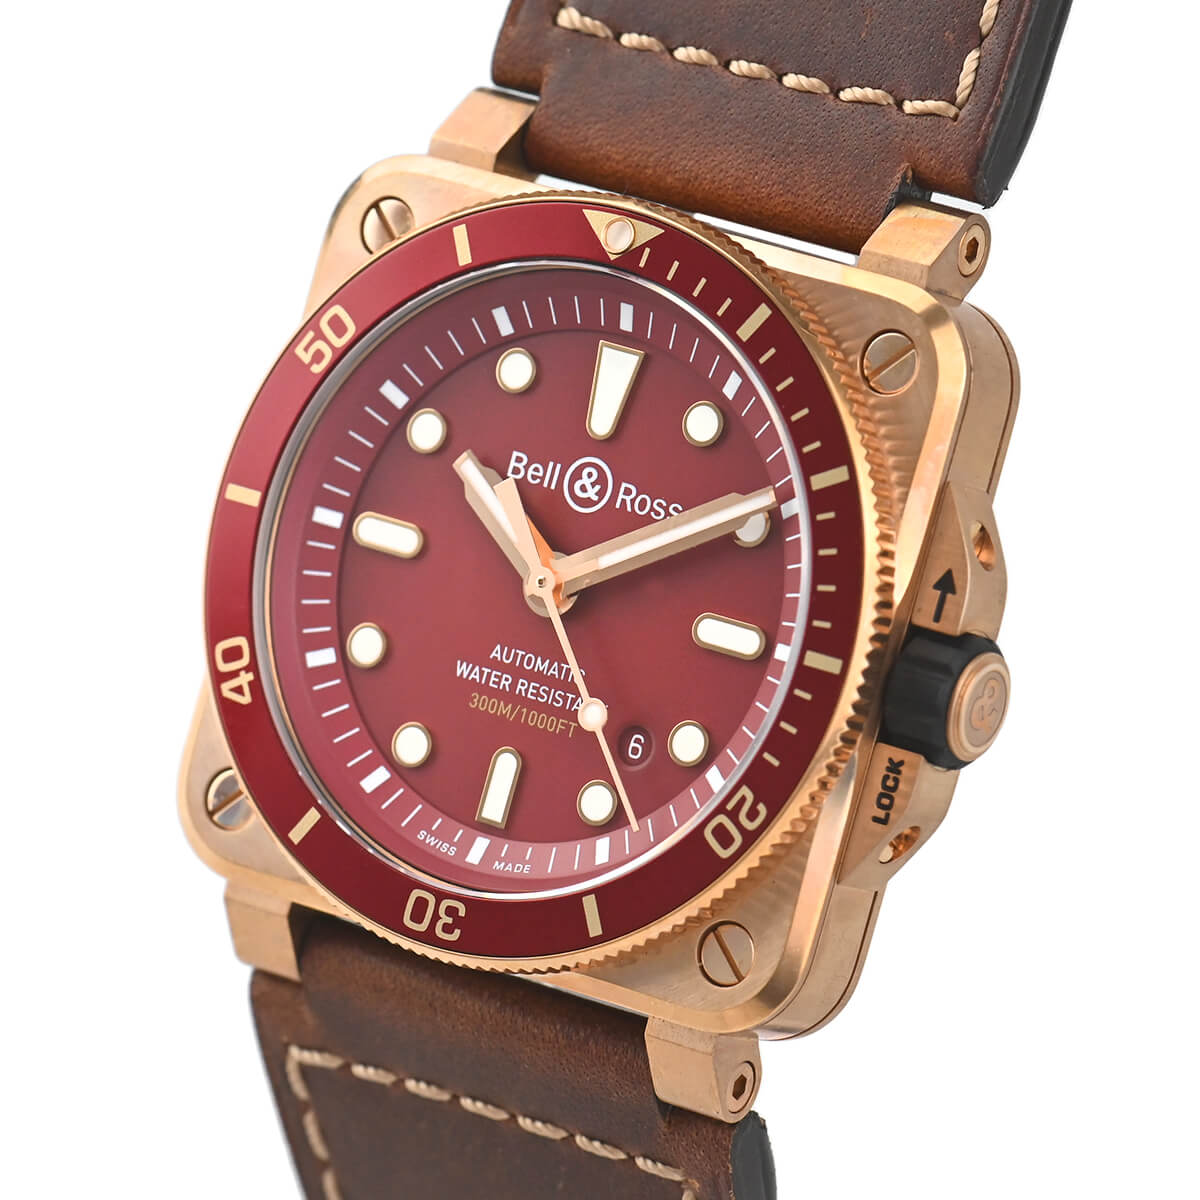 BR03—92 DIVER RED BRONZE 世界限定999本